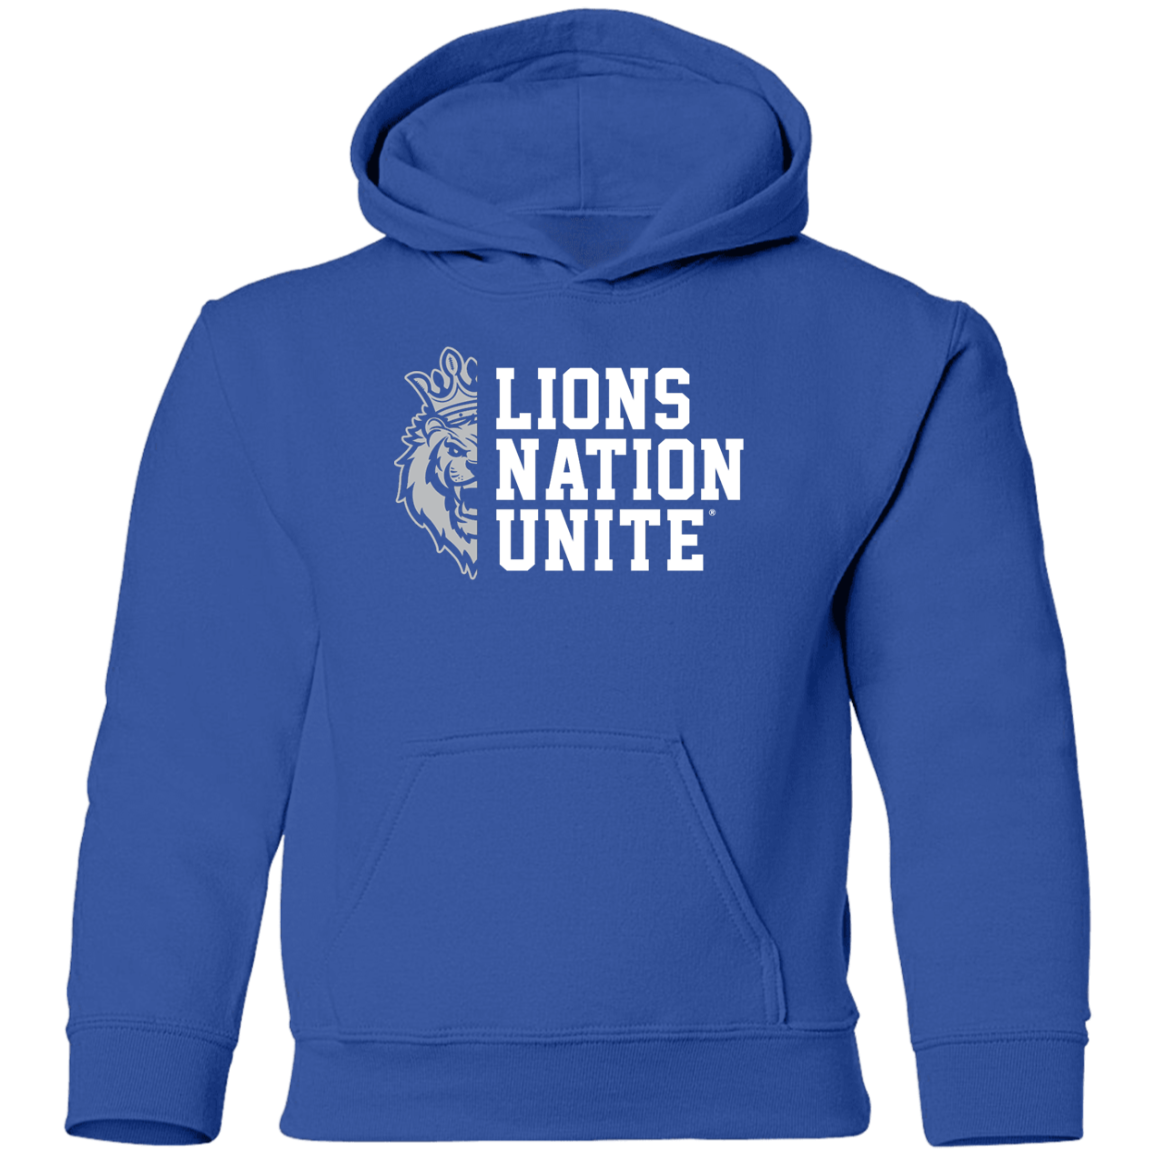 Lions Nation Unite - G185B Youth Pullover Hoodie